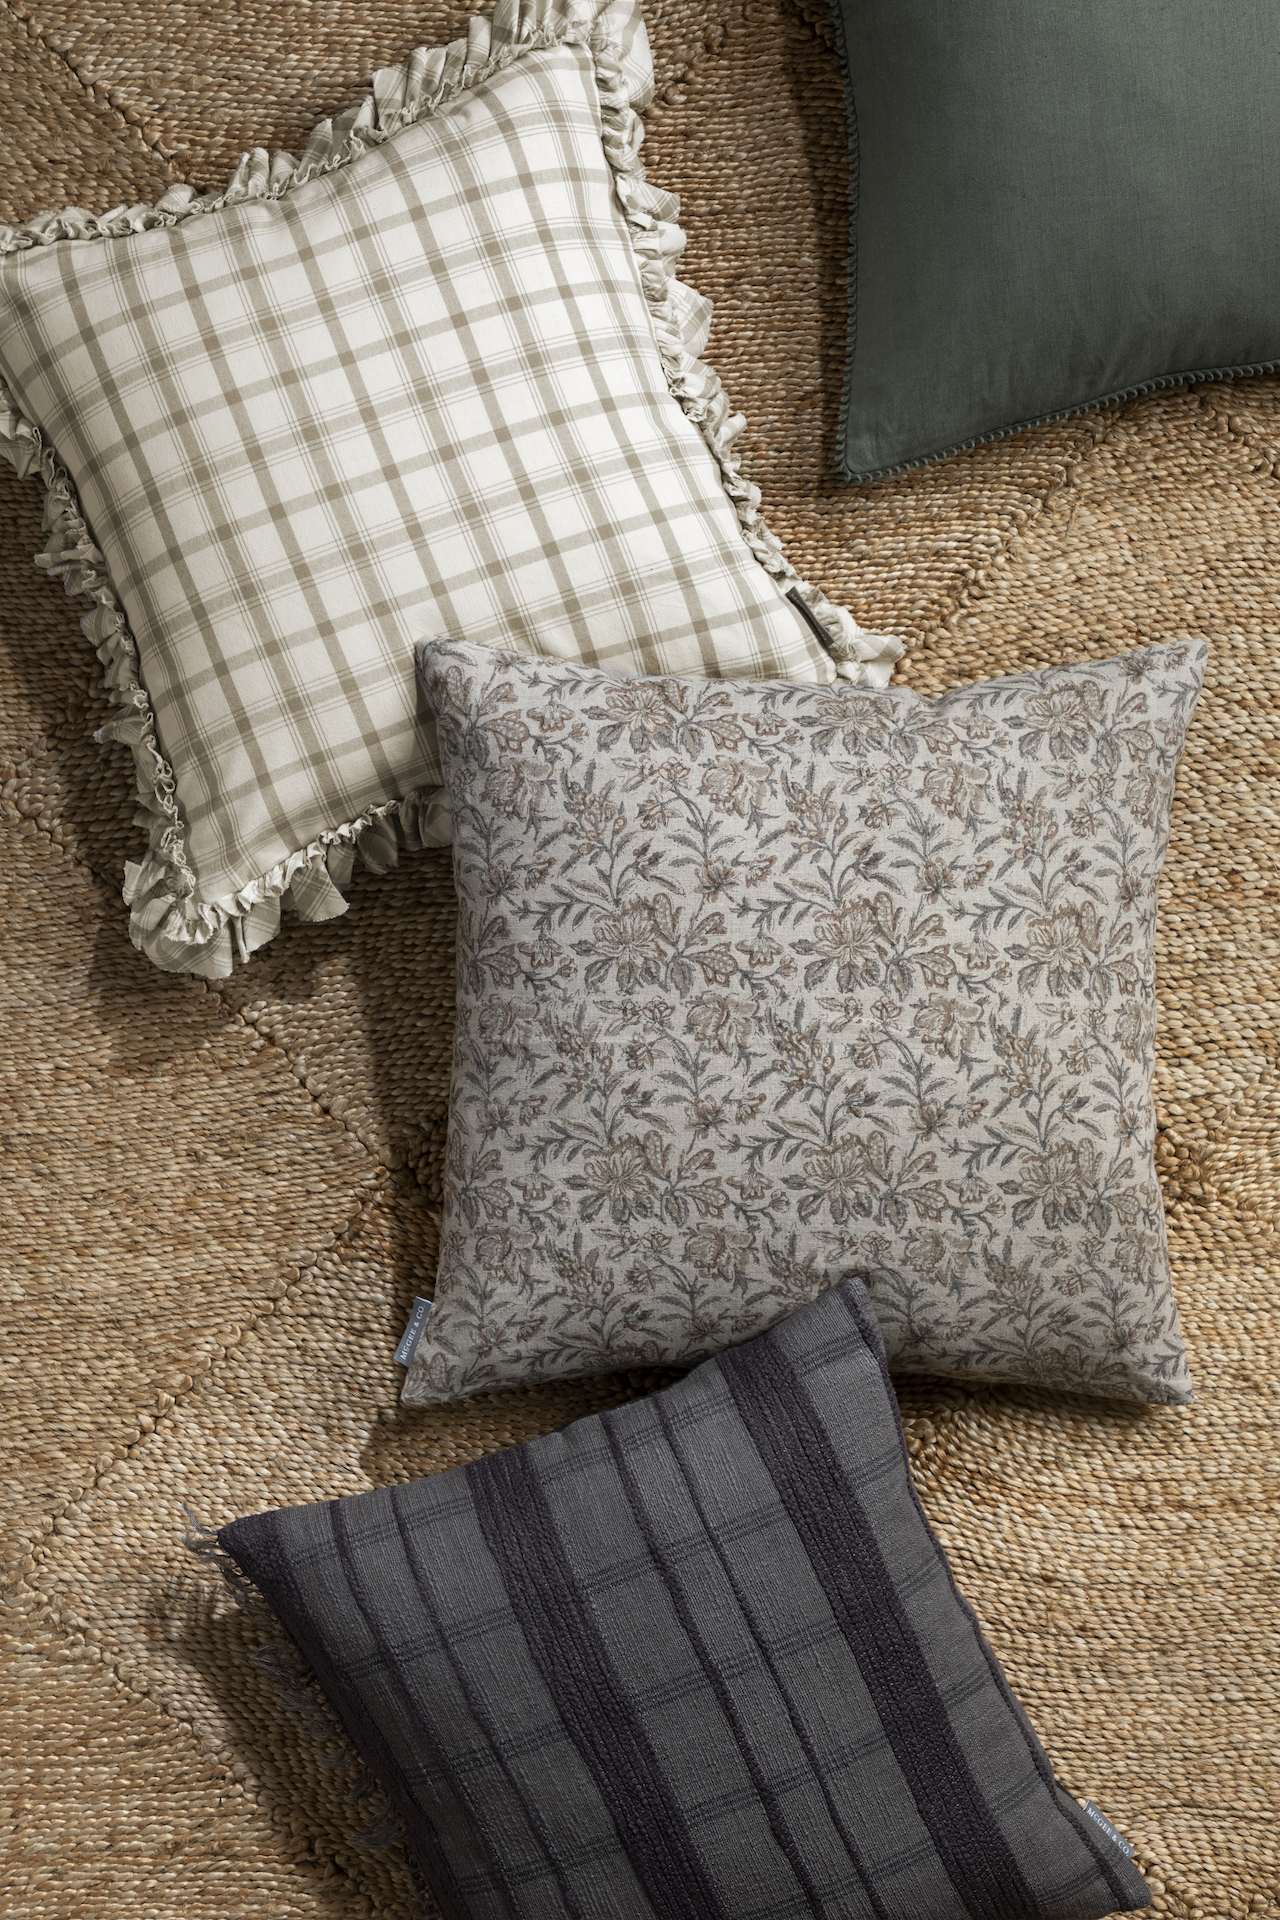 Patterned throw pillows on jute rug